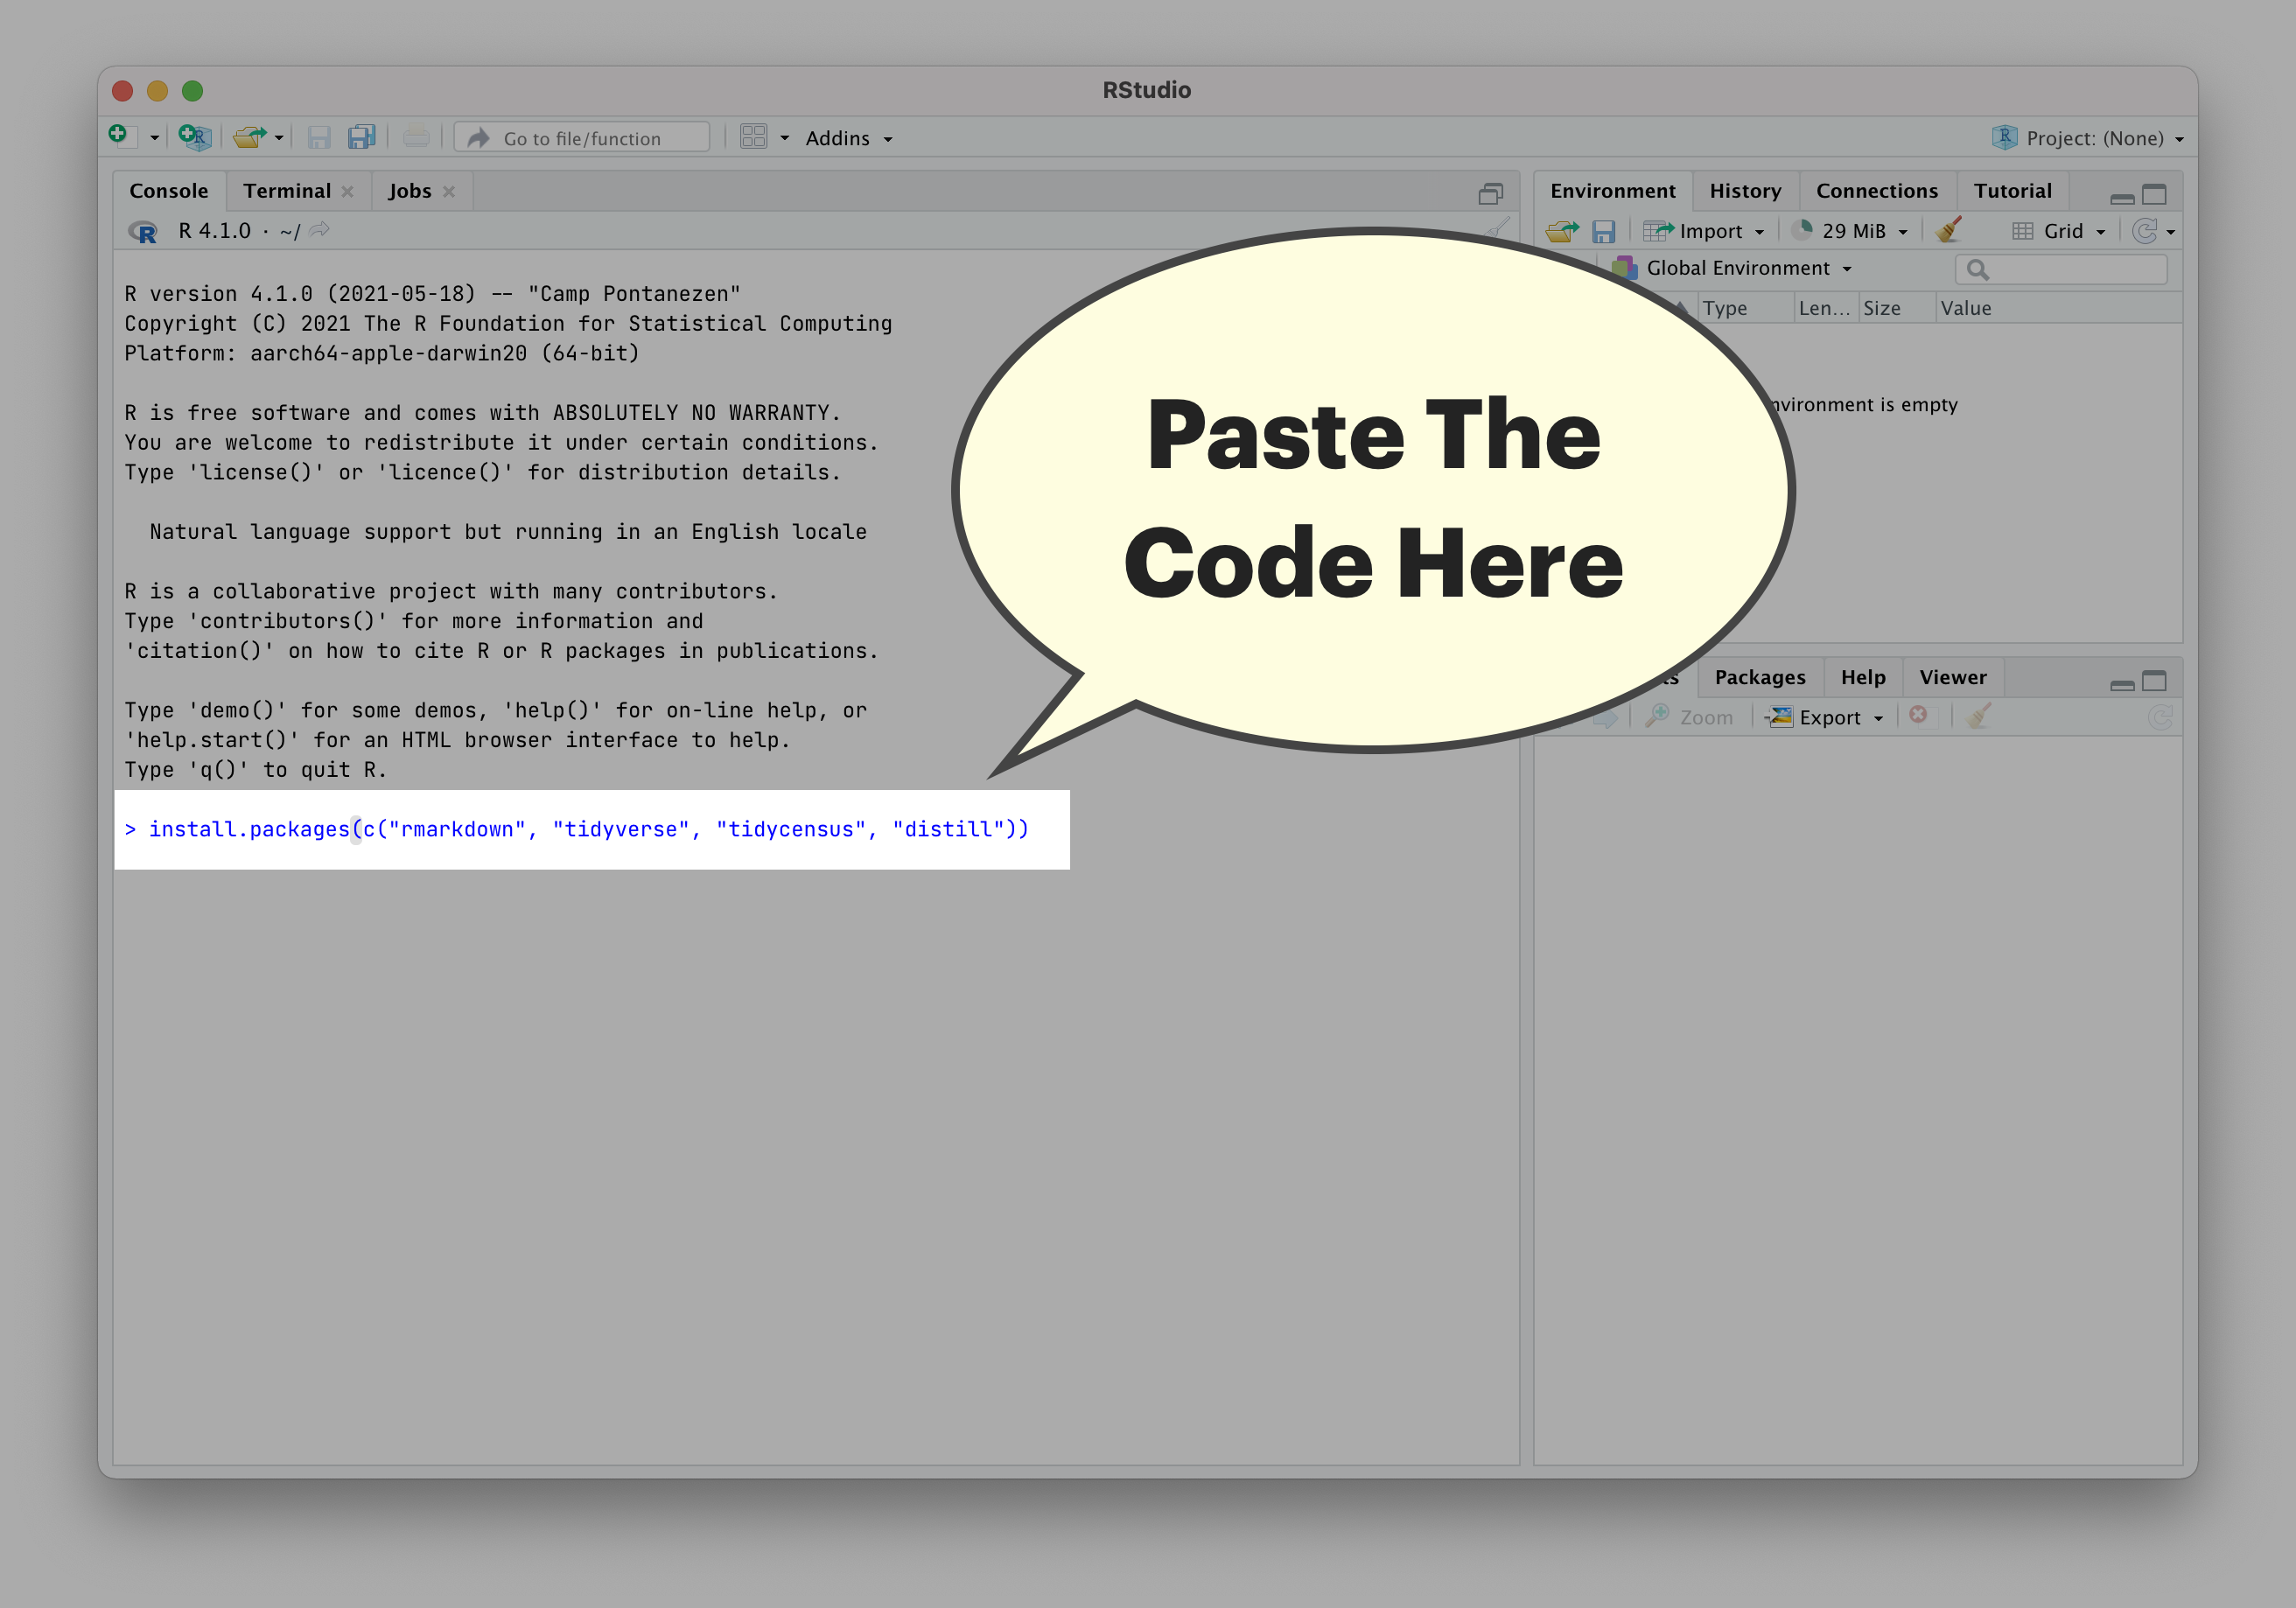 Pasting Code in the Console